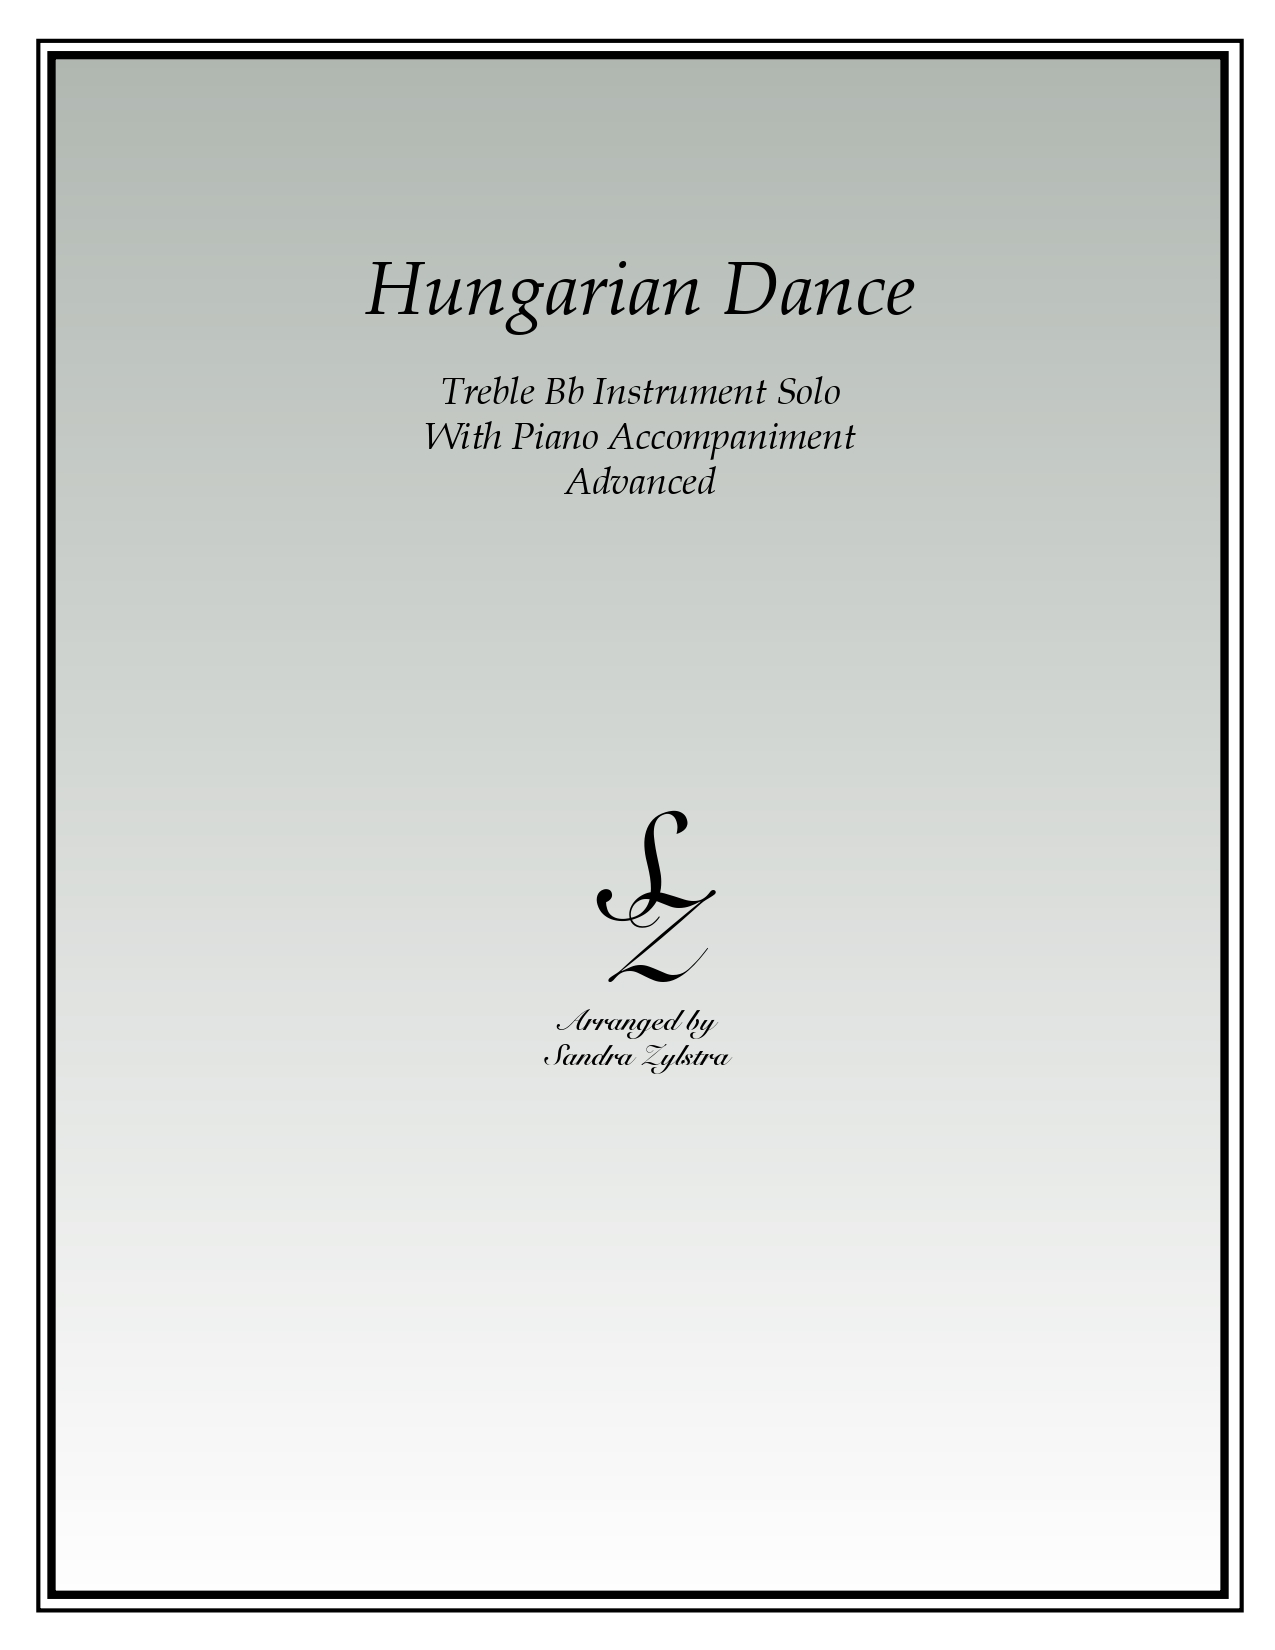 Hungarian Dance Bb instrument solo part cover page 00011